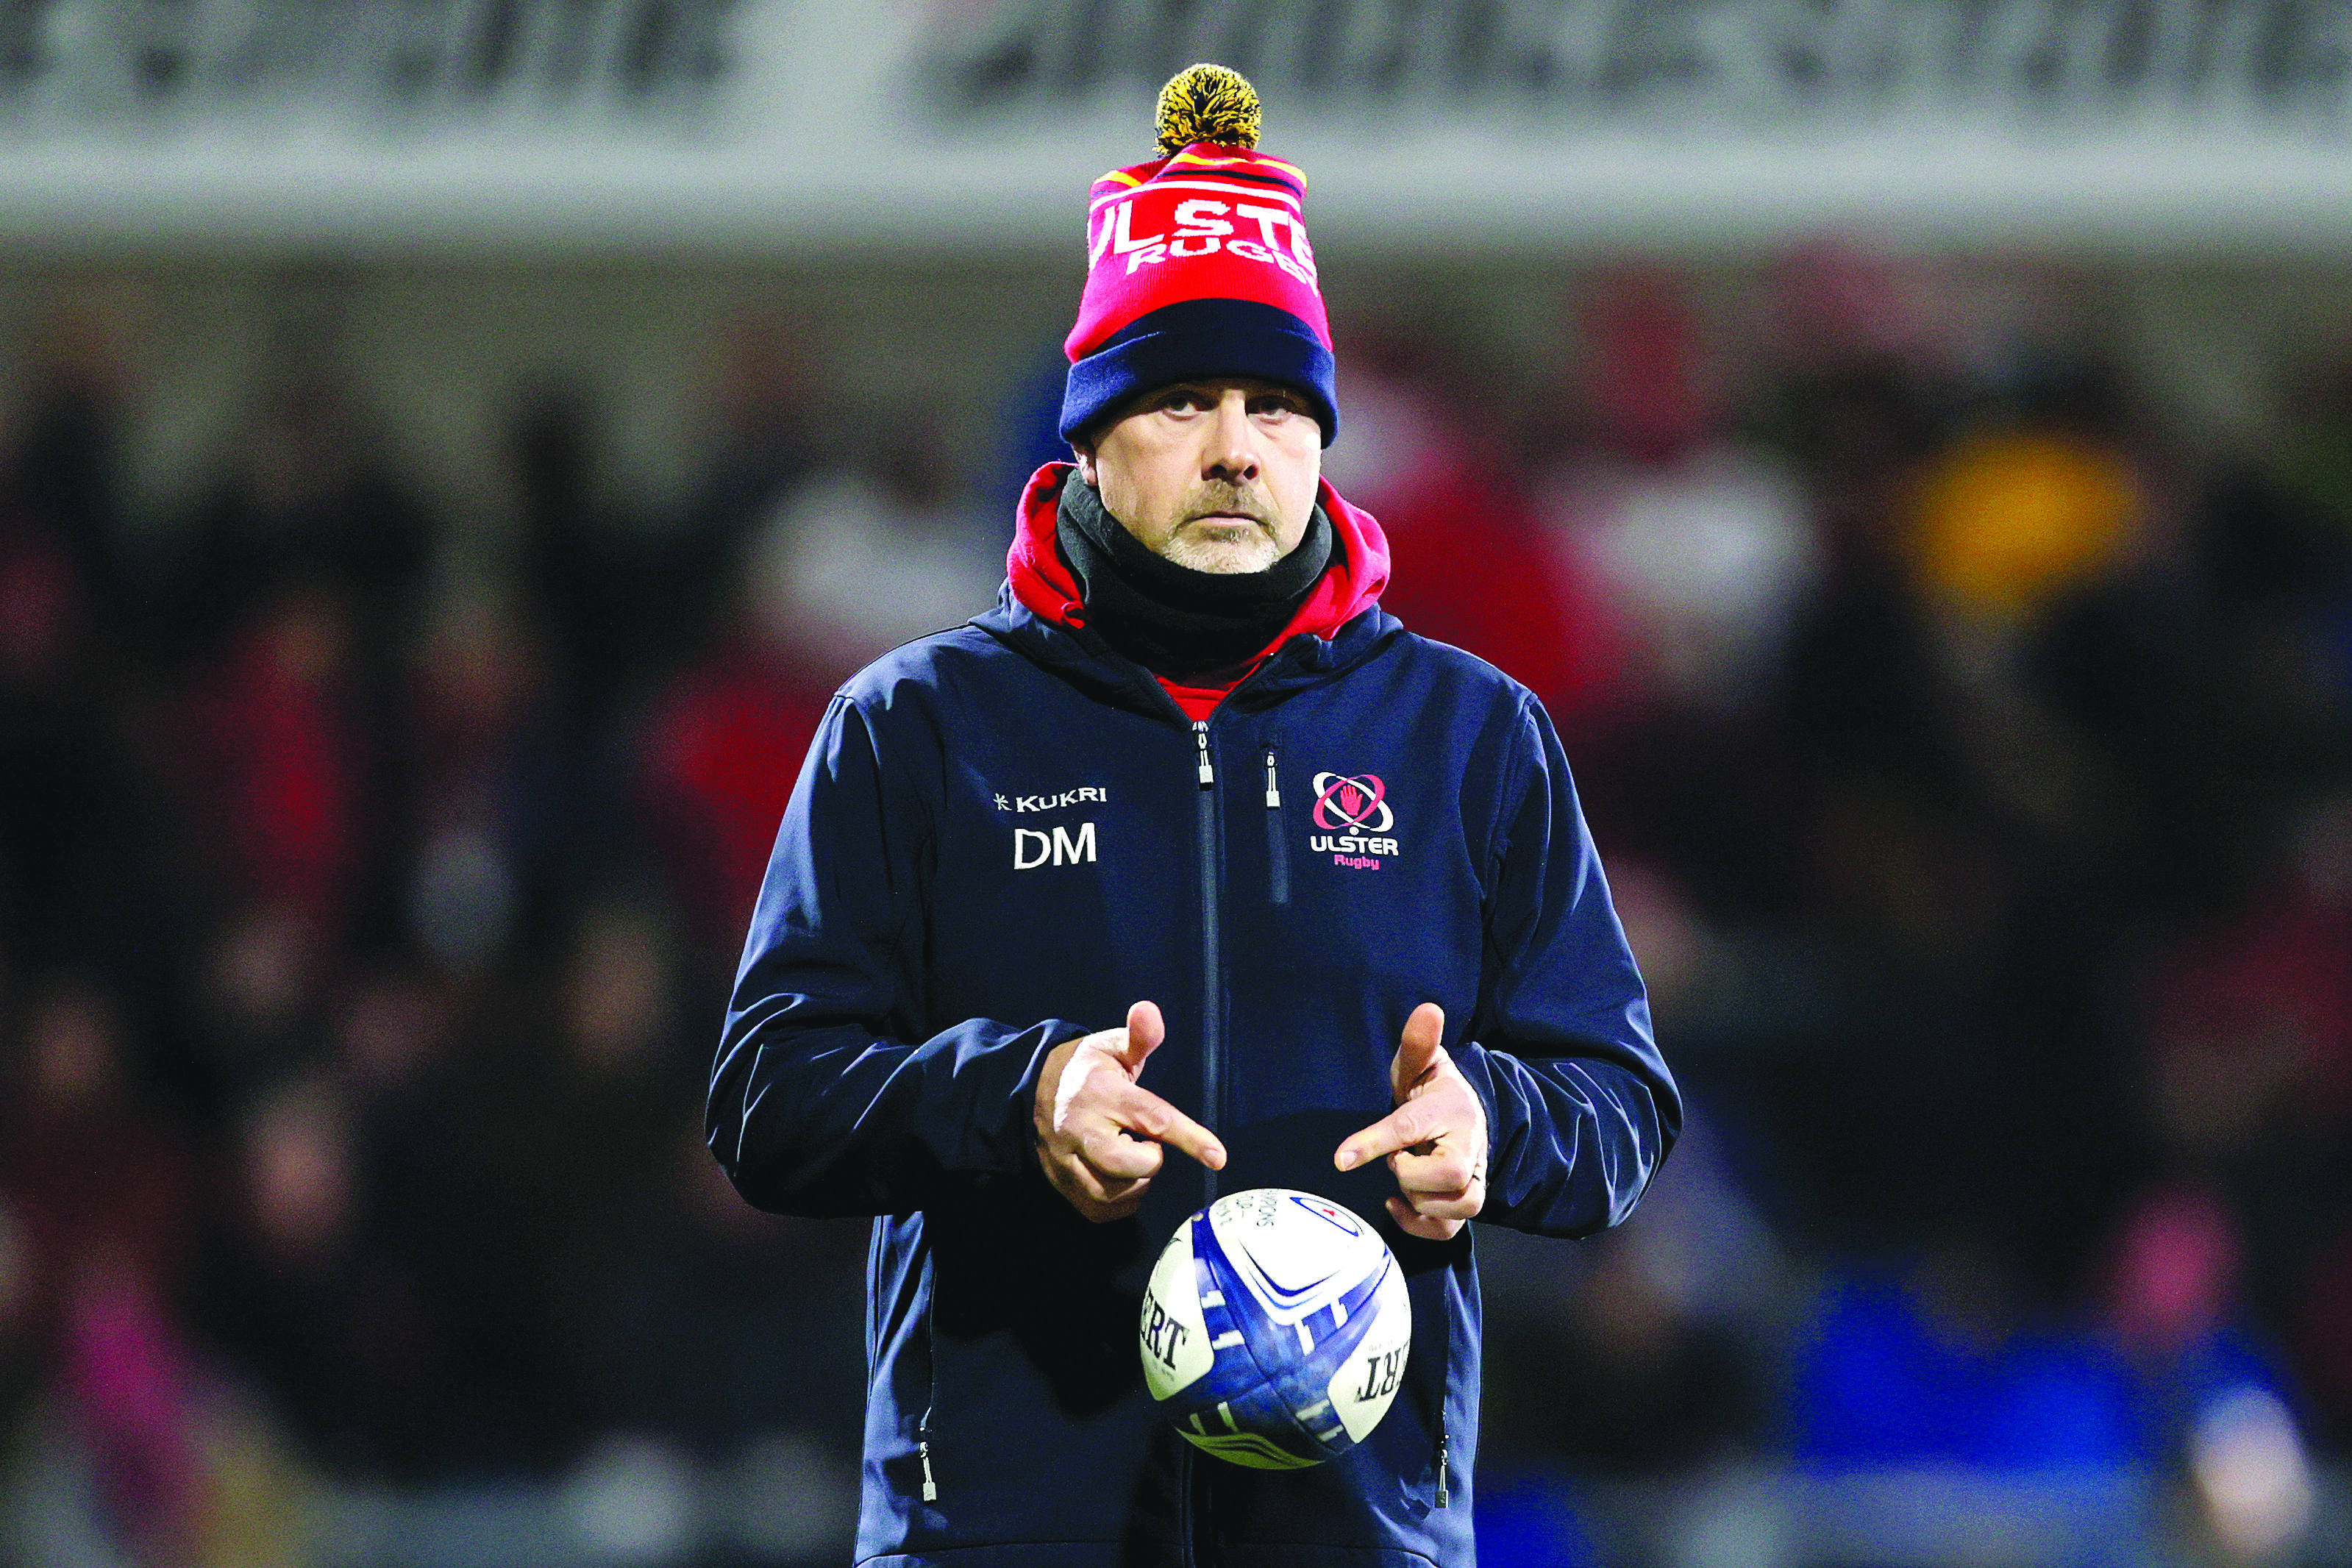 Dan McFarland admits the Christmas period was frustrating as home games against Connacht and Leinster were cancelled due to the number of Covid cases in the Ulster squad